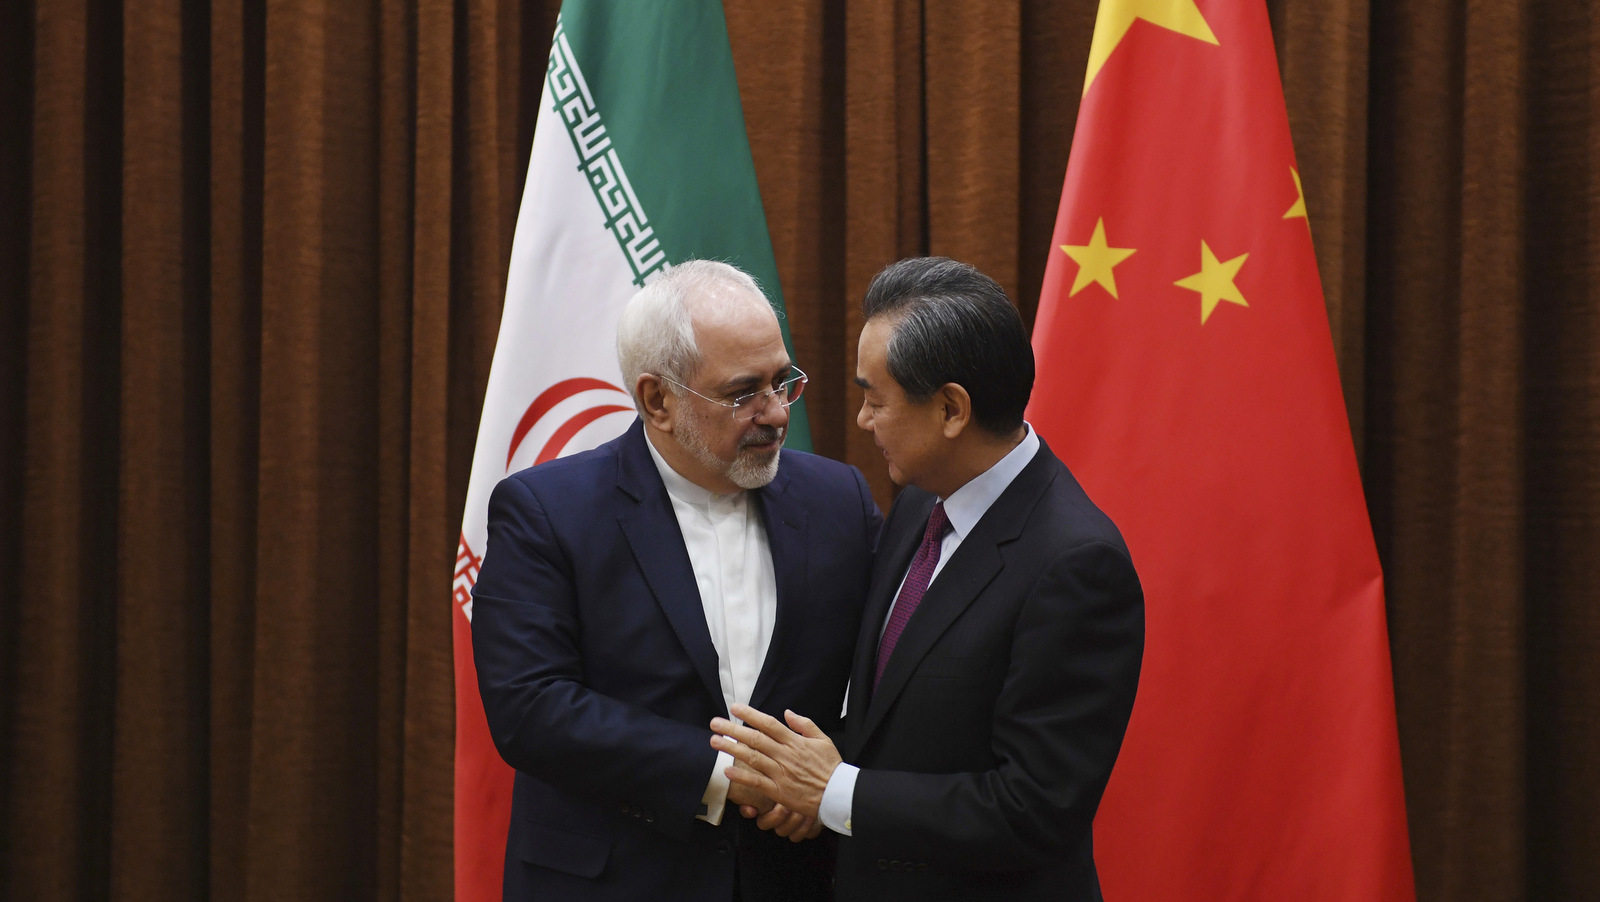 Iranian Foreign Minister Mohammad Javad Zarif, left, is greeted by Chinese Foreign Minister Wang Yi before a meeting in Beijing Monday, Dec. 5, 2016. (Greg Baker/AP)